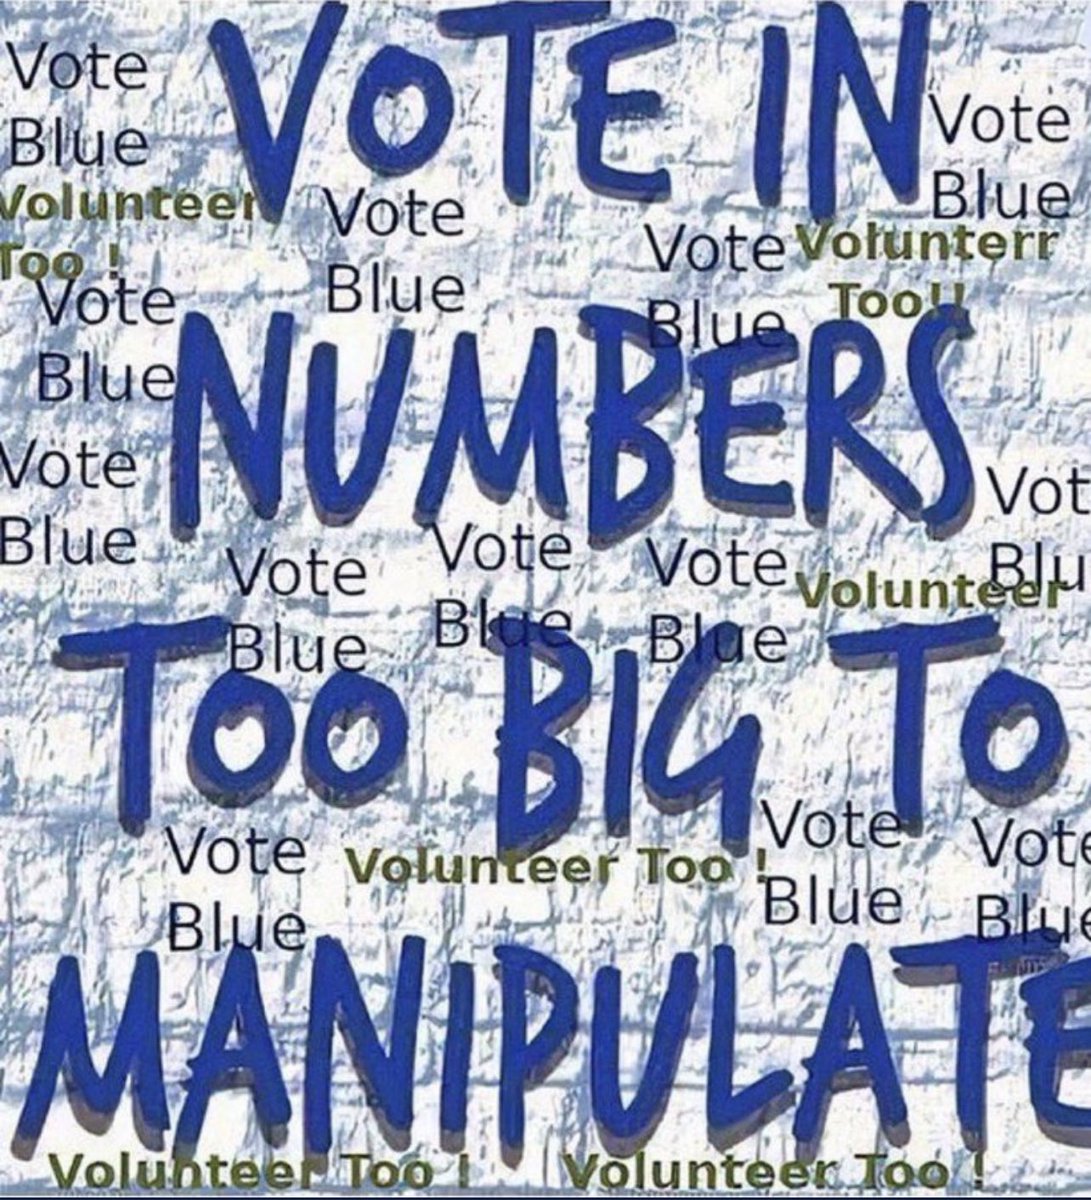 @davidplouffe Vote Blue full ballot in every election big and small. Check your registration prior to every election deadline. If you mail or absentee vote go online and  ensure your ballot is received and counted, if it’s not immediately cure your ballot.